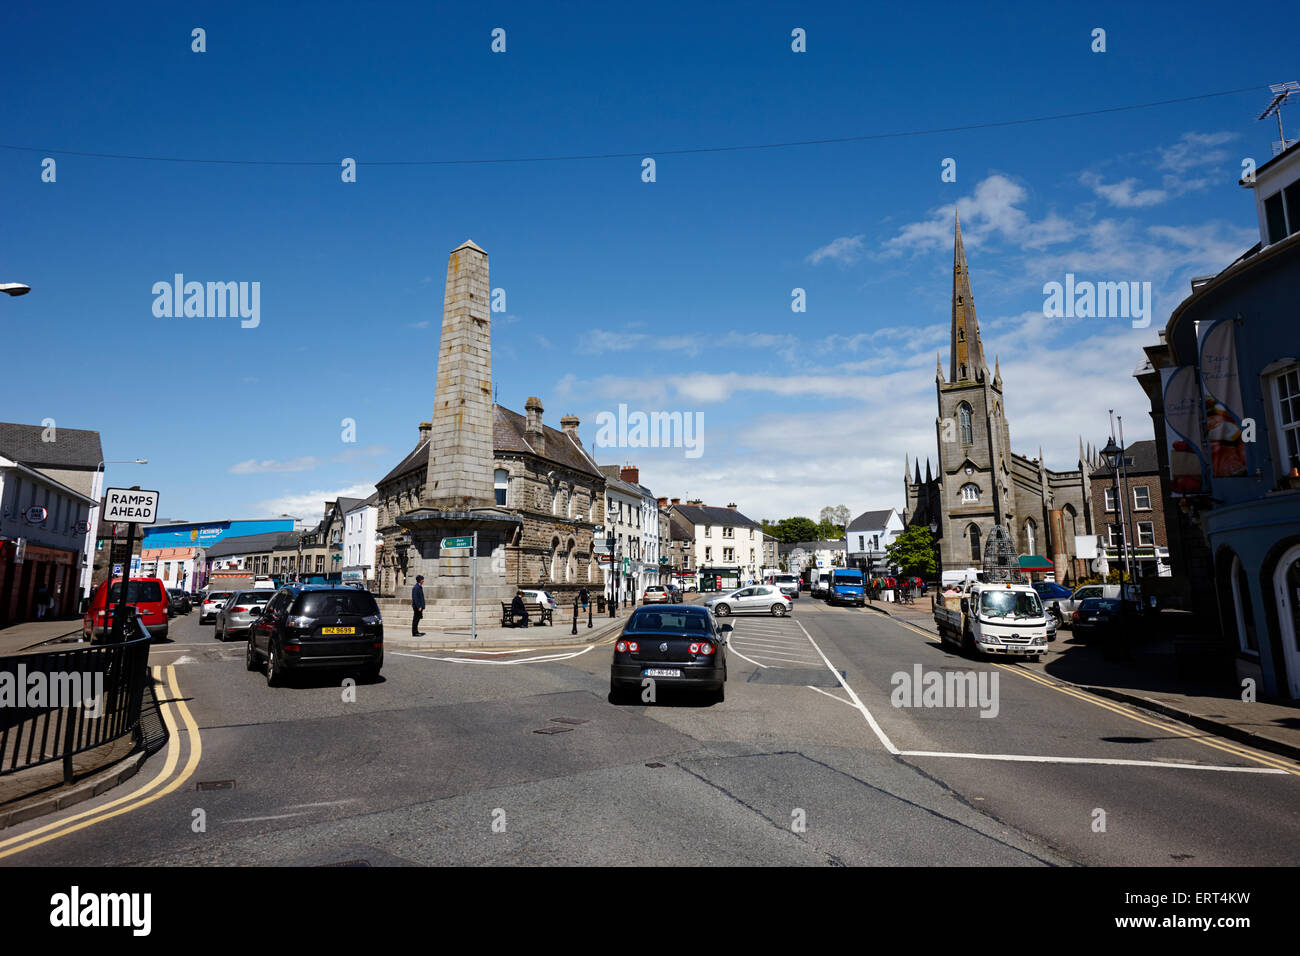 Church square in monaghan town county monaghan republic of ireland Stock Photo